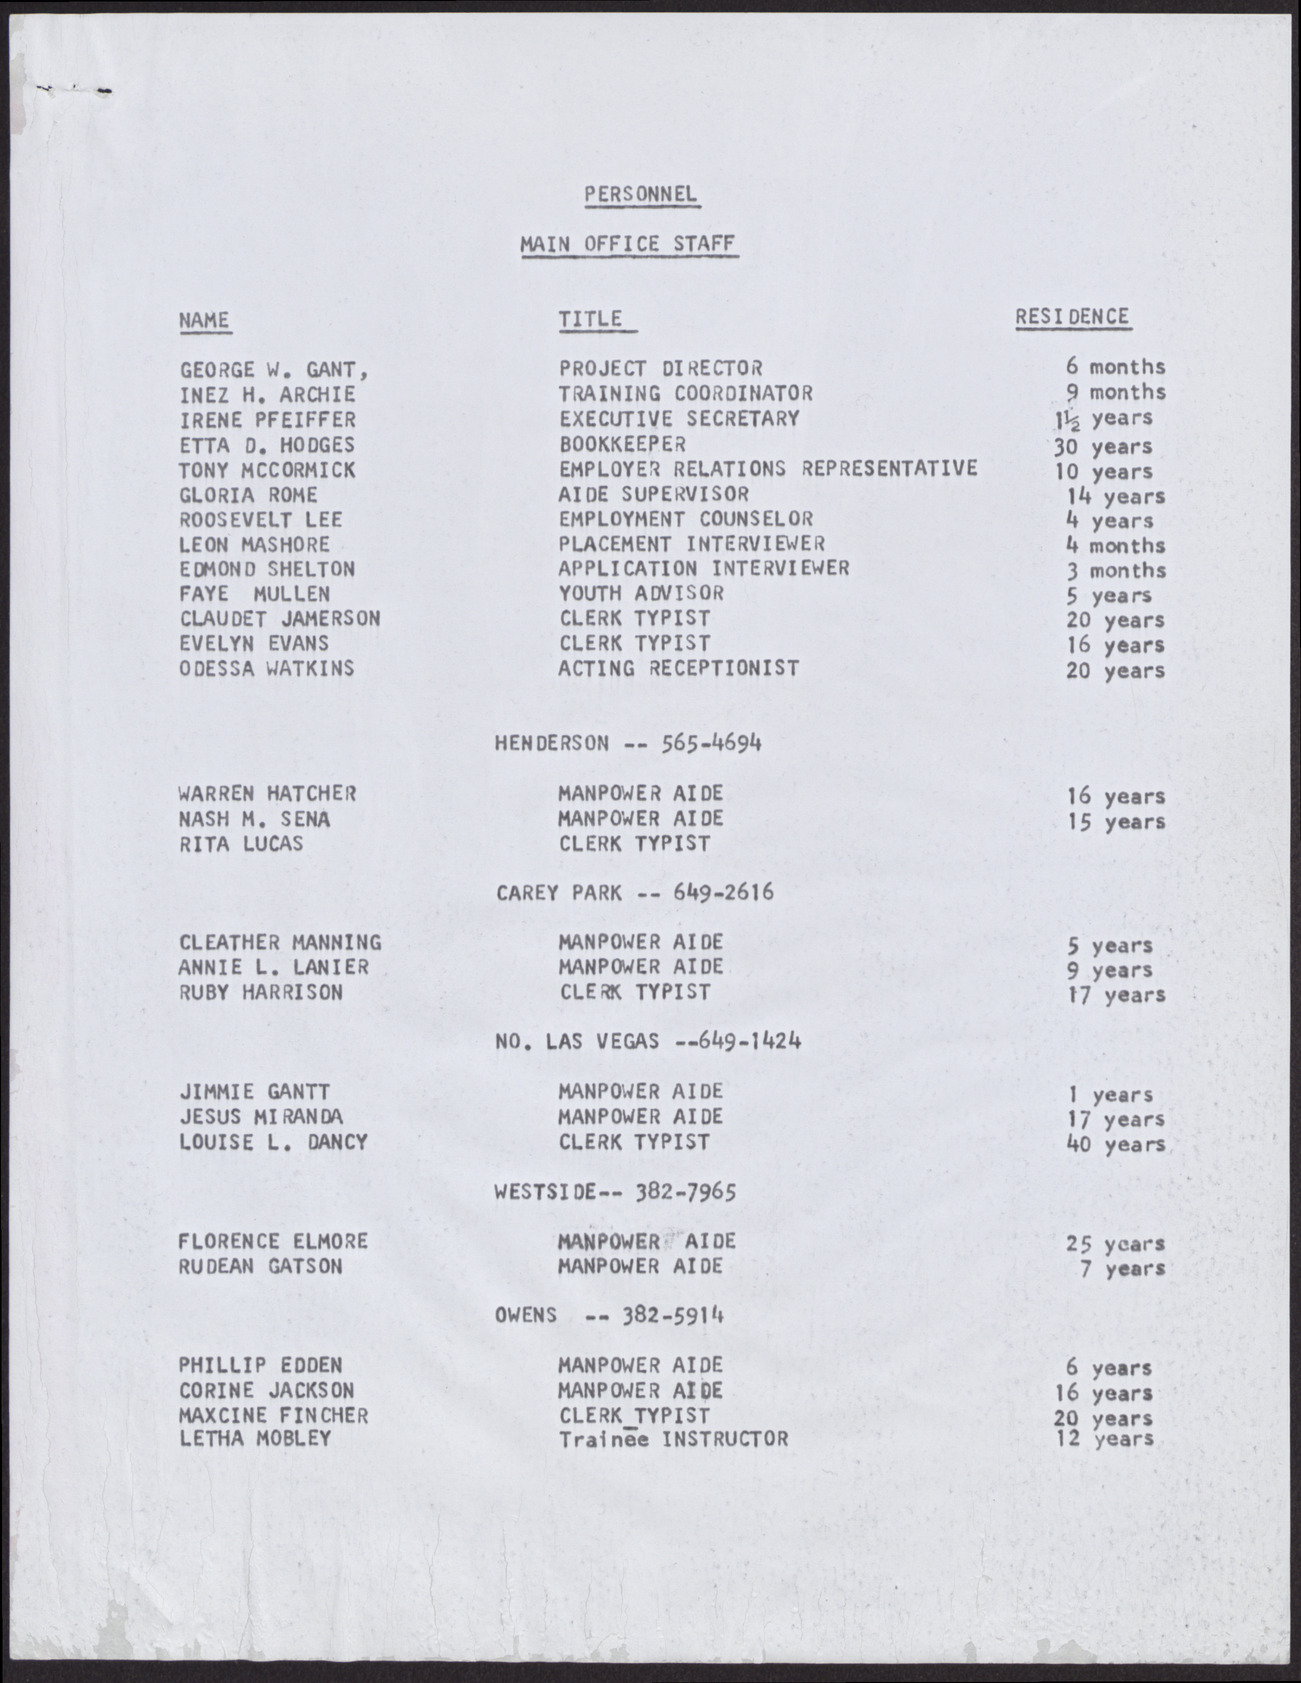 Manpower Development center Progress Report and list of personnel (2 pages), December 13, 1967, page 2